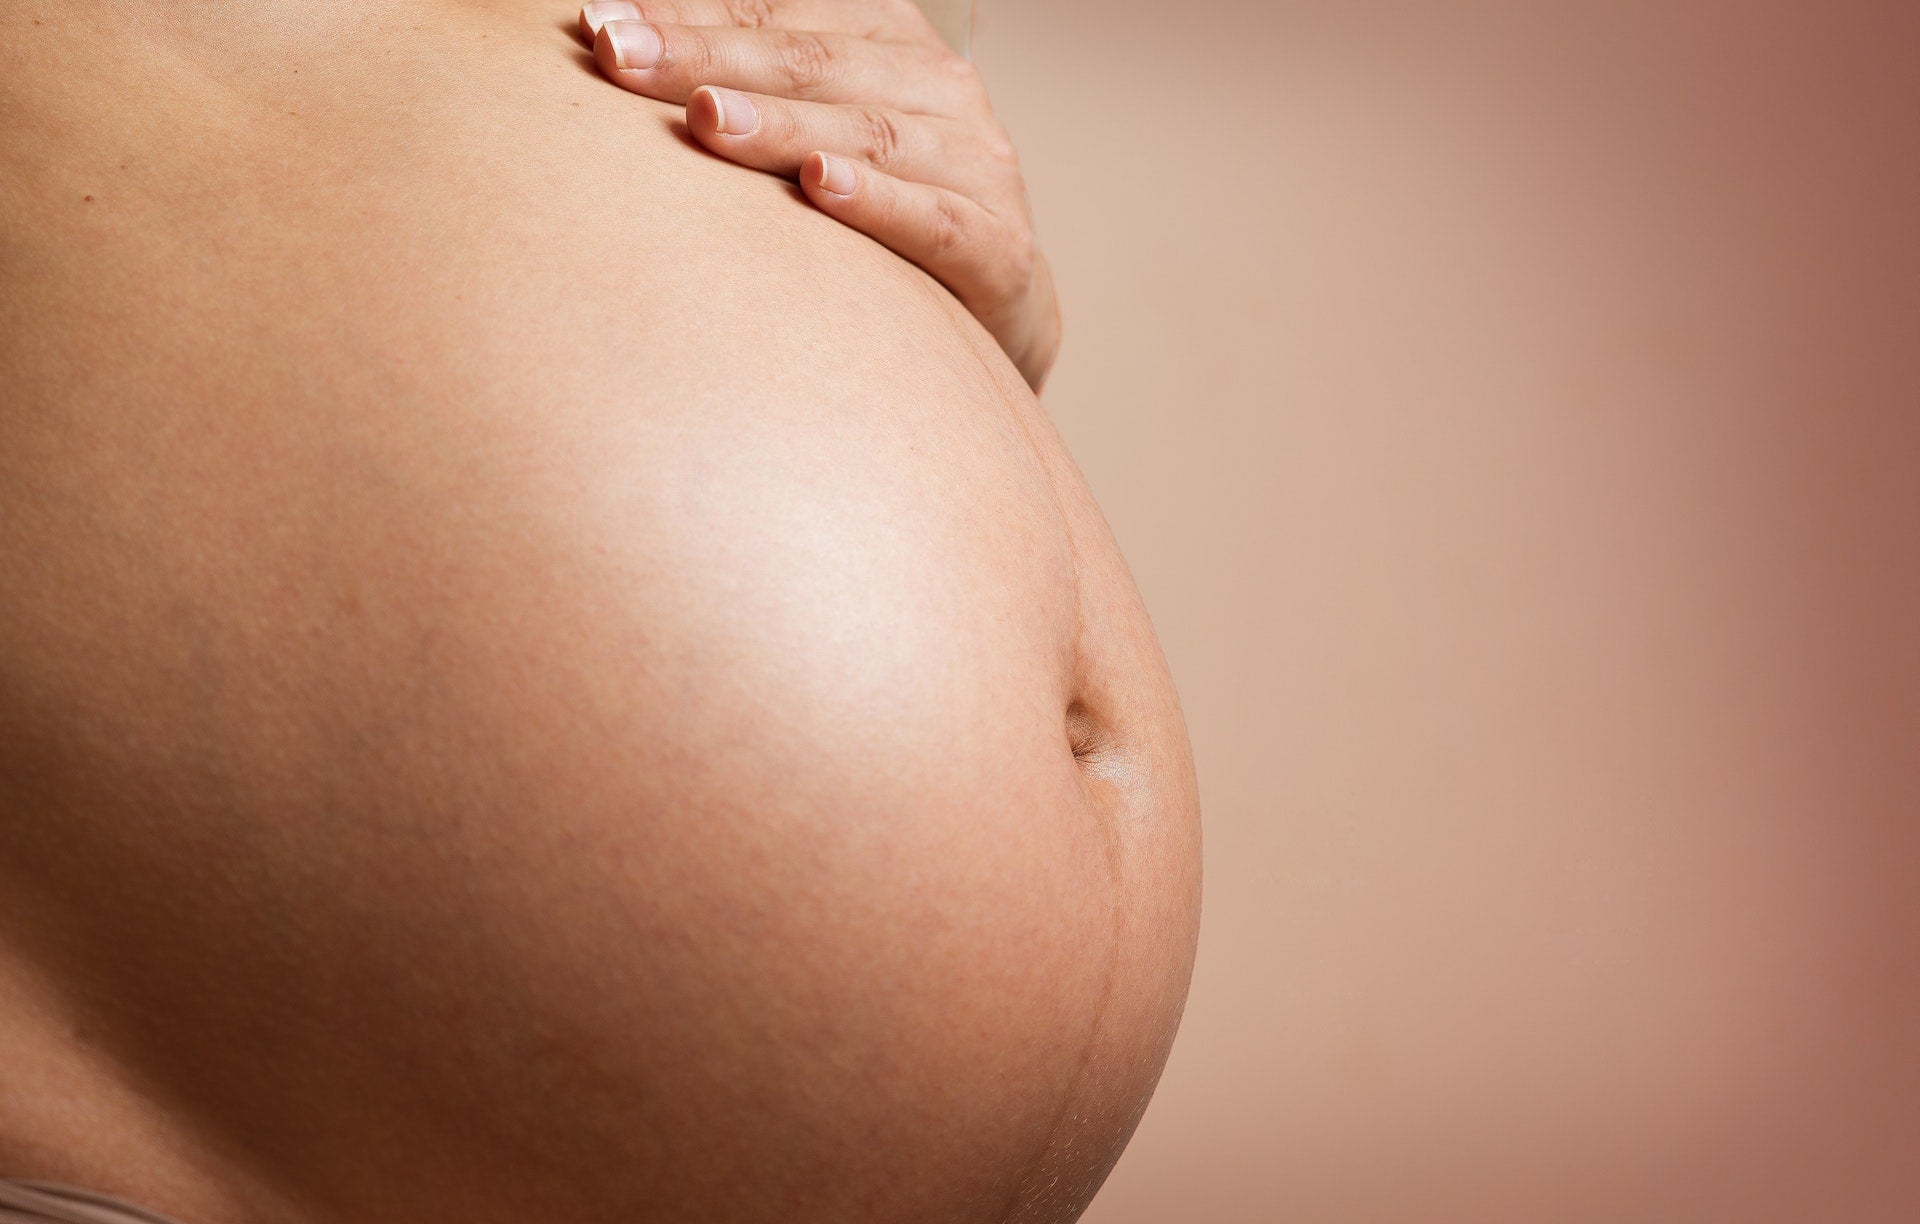 Frequent urination in pregnancy: What's with all the pee?